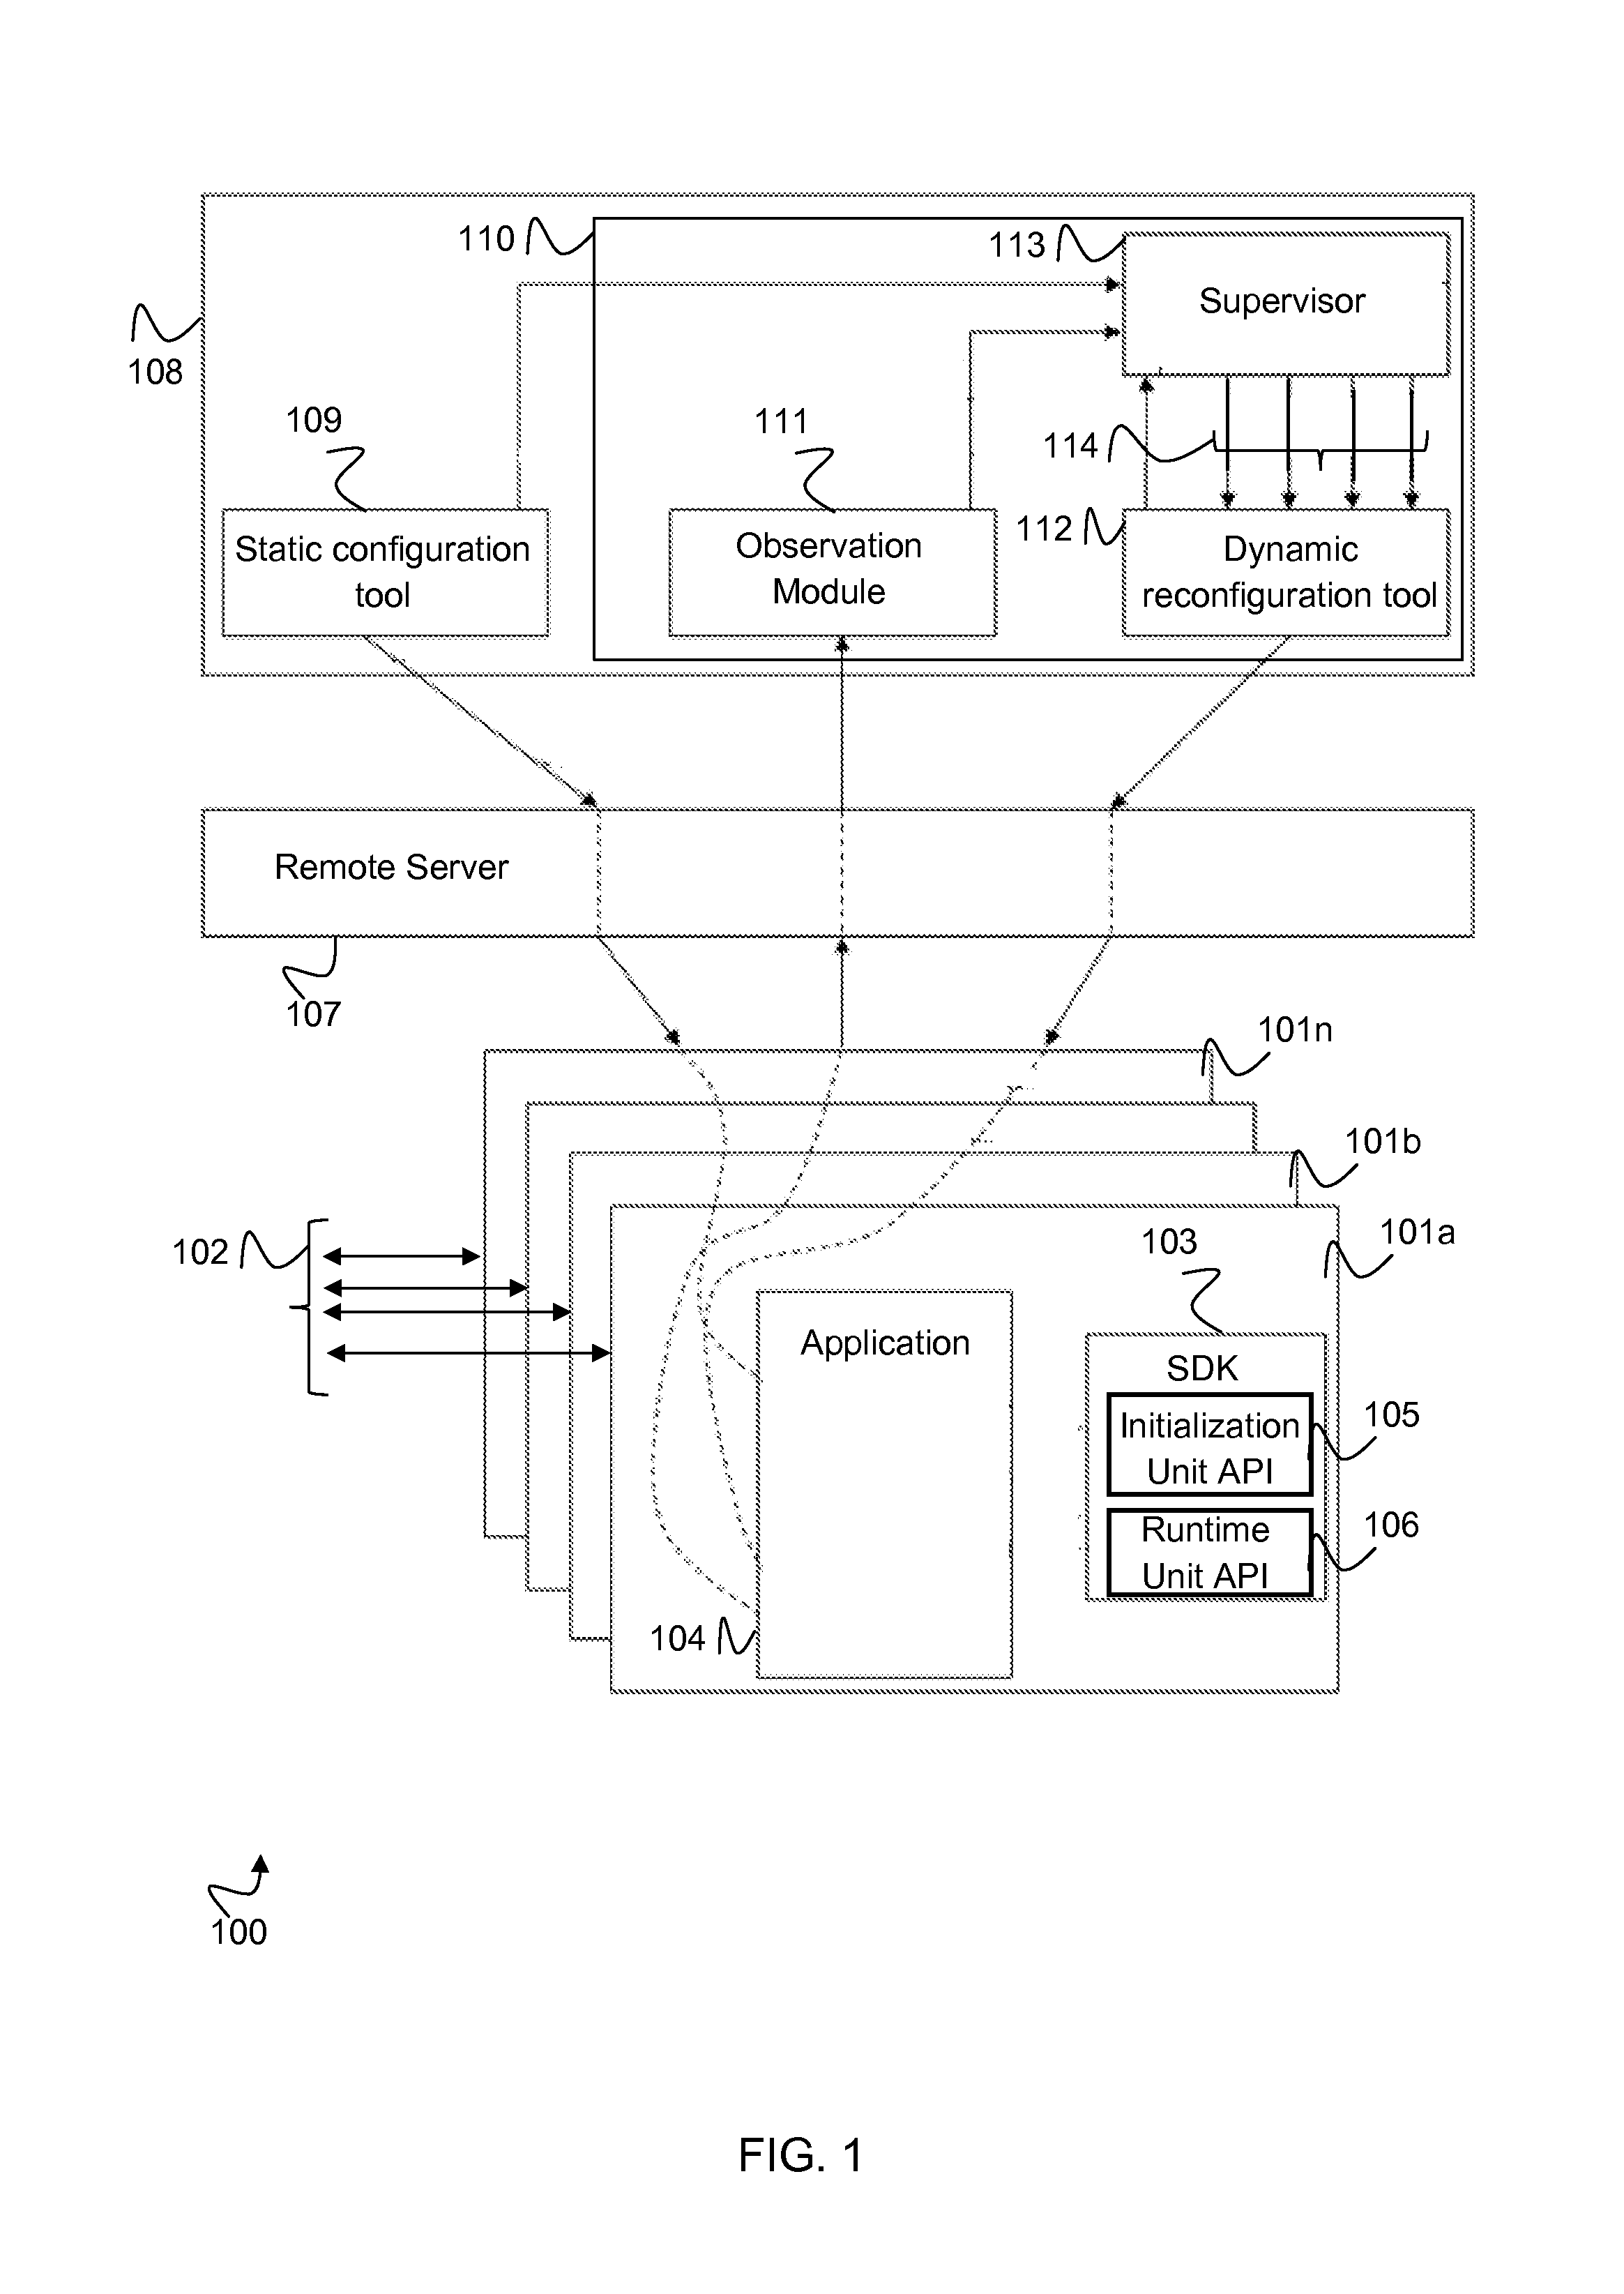 Apparatus for optimising a configuration of a communications network device